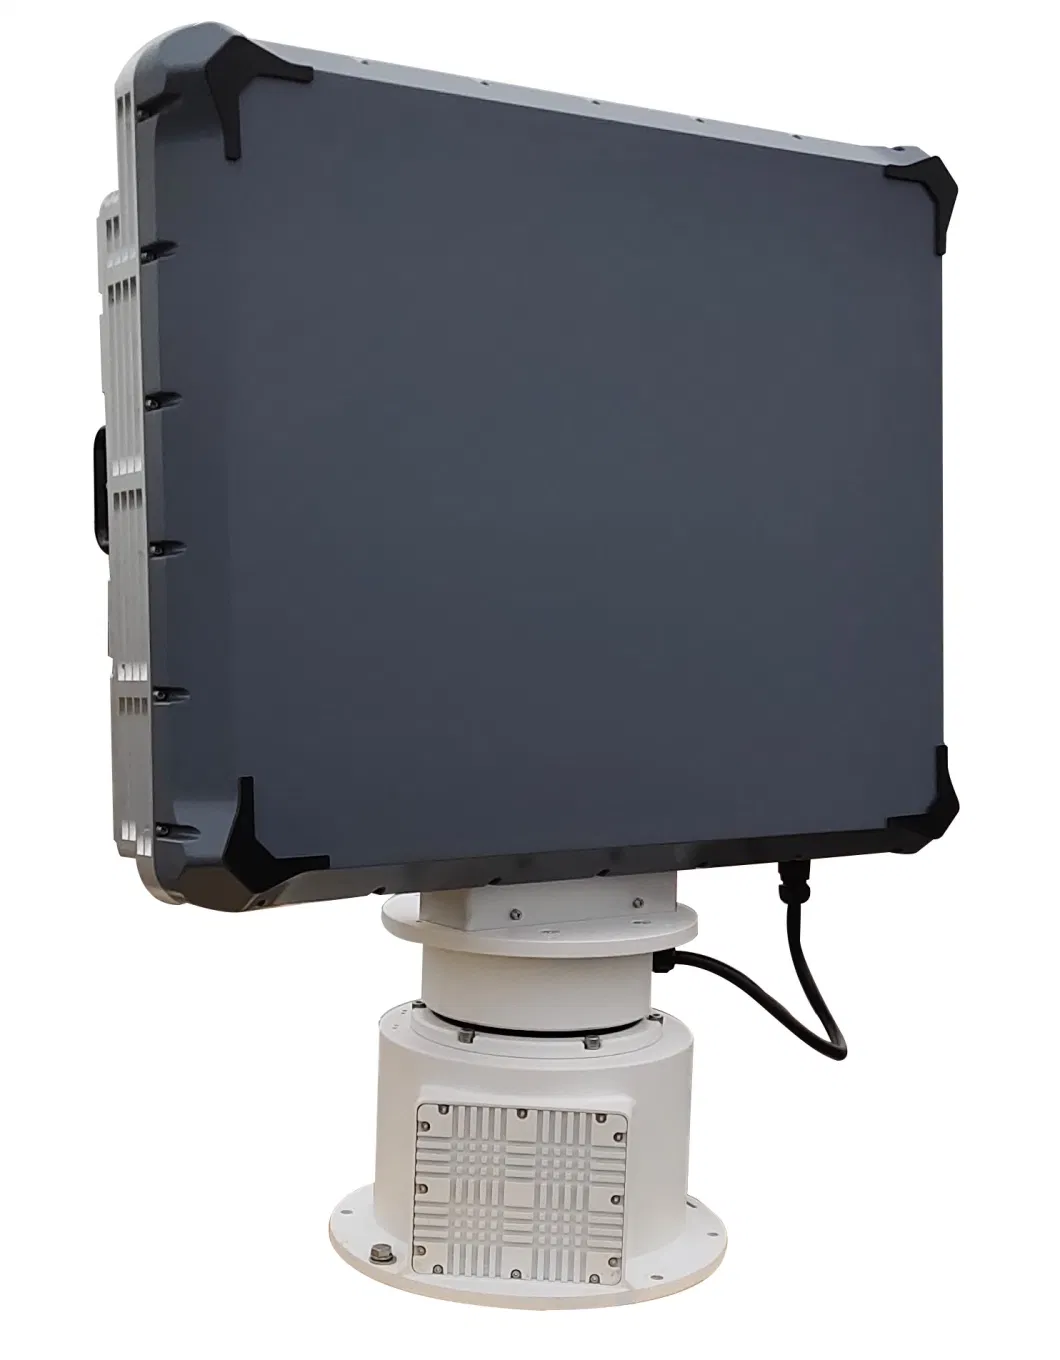 Perimeter Surveillance Radars with Wide-Area Detection and Tracking to Provide Advanced Warning and Response Through Automated Alarms